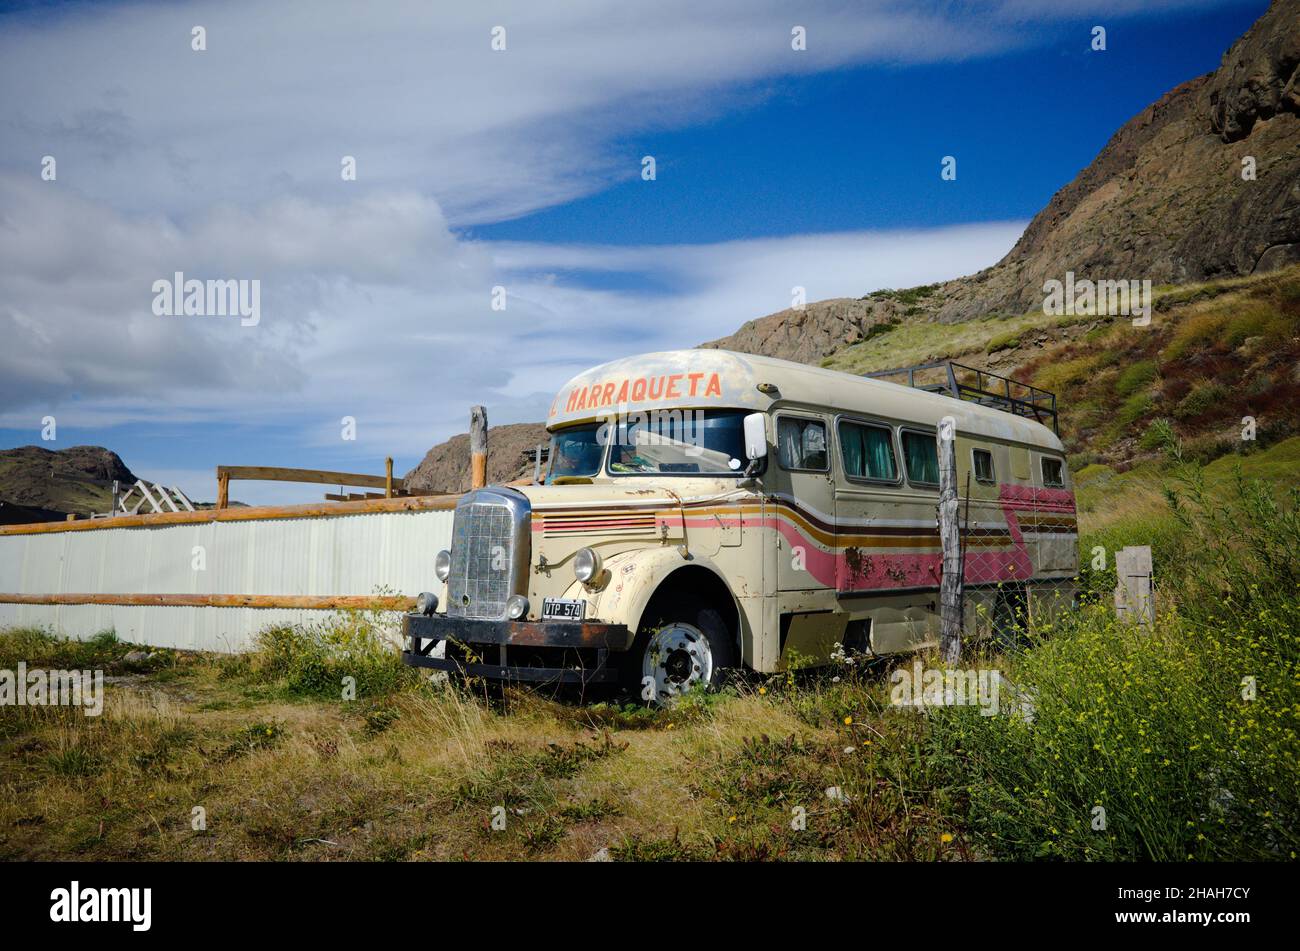 El Chalten, Santa Cruz, Argentina - March, 2020: Abandoned bus with rust remade into house on wheels.  Old 1940s Mercedes Benz Bus with La Marraqueta Stock Photo